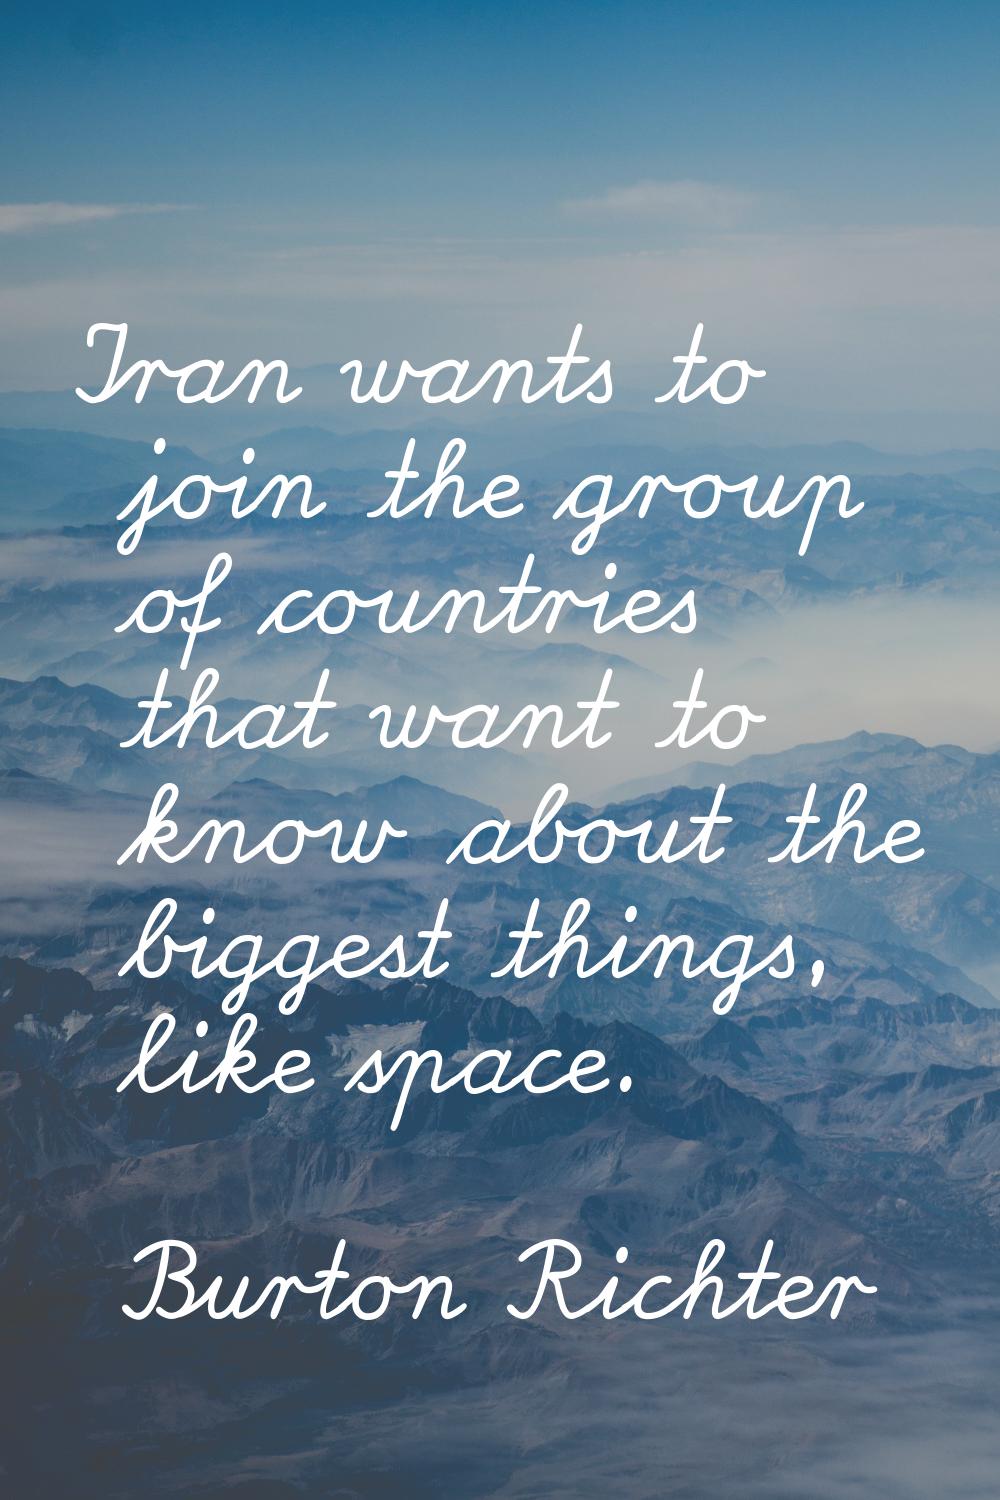 Iran wants to join the group of countries that want to know about the biggest things, like space.